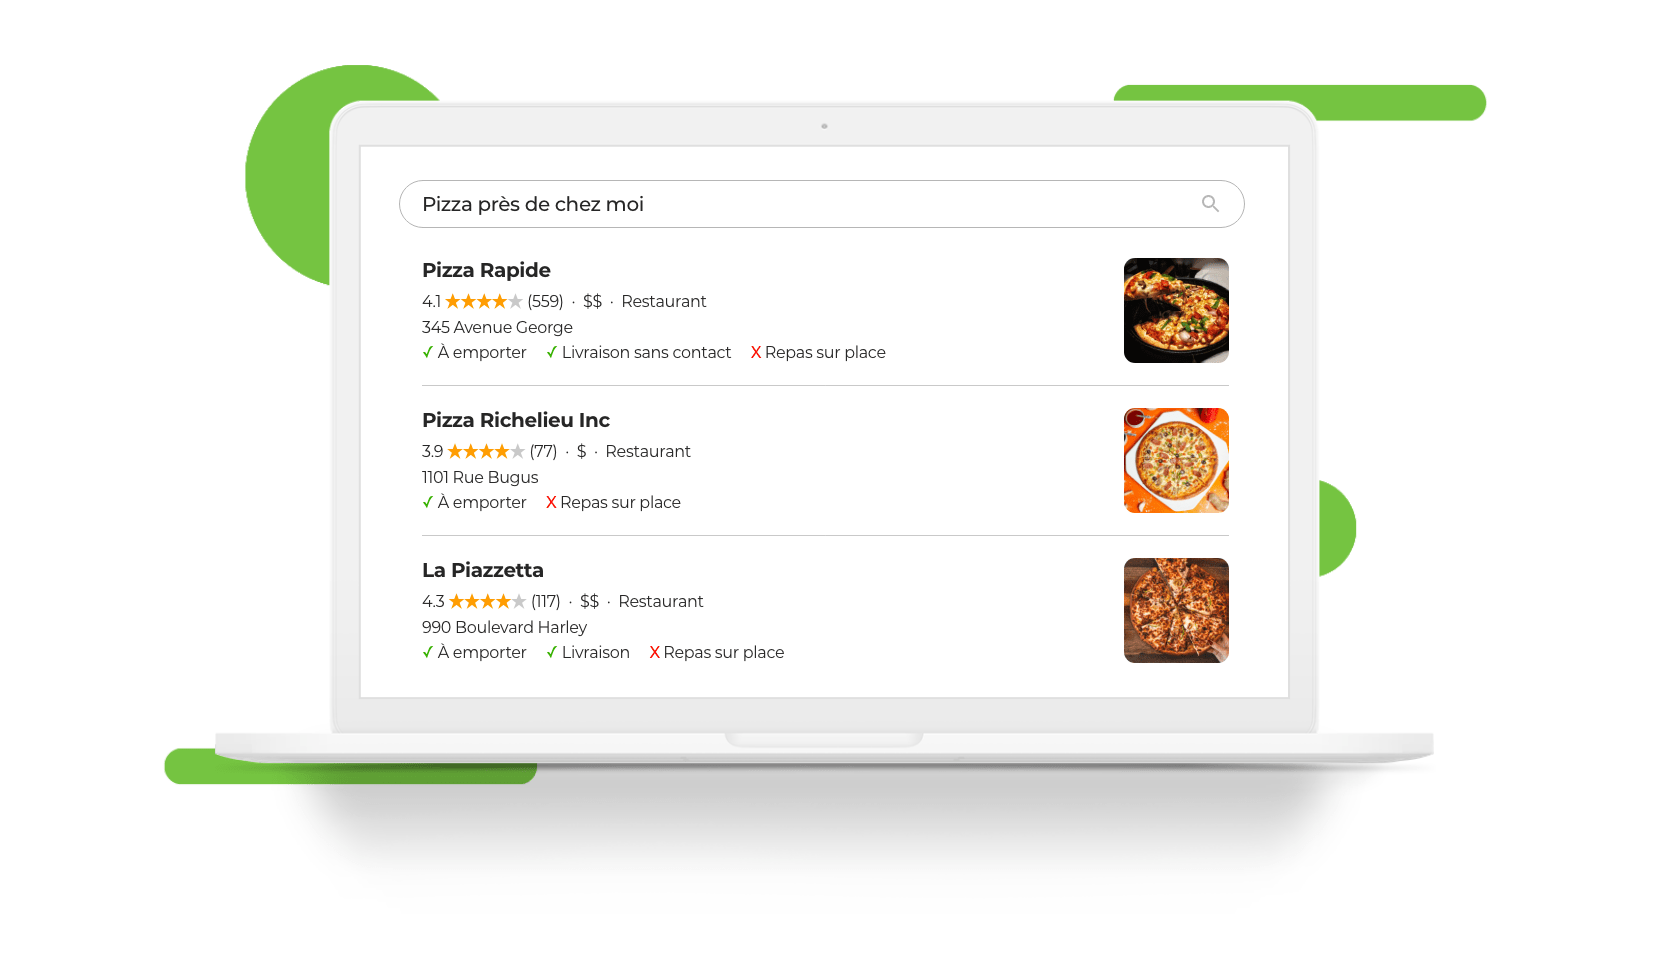 pizza near me results page on laptop